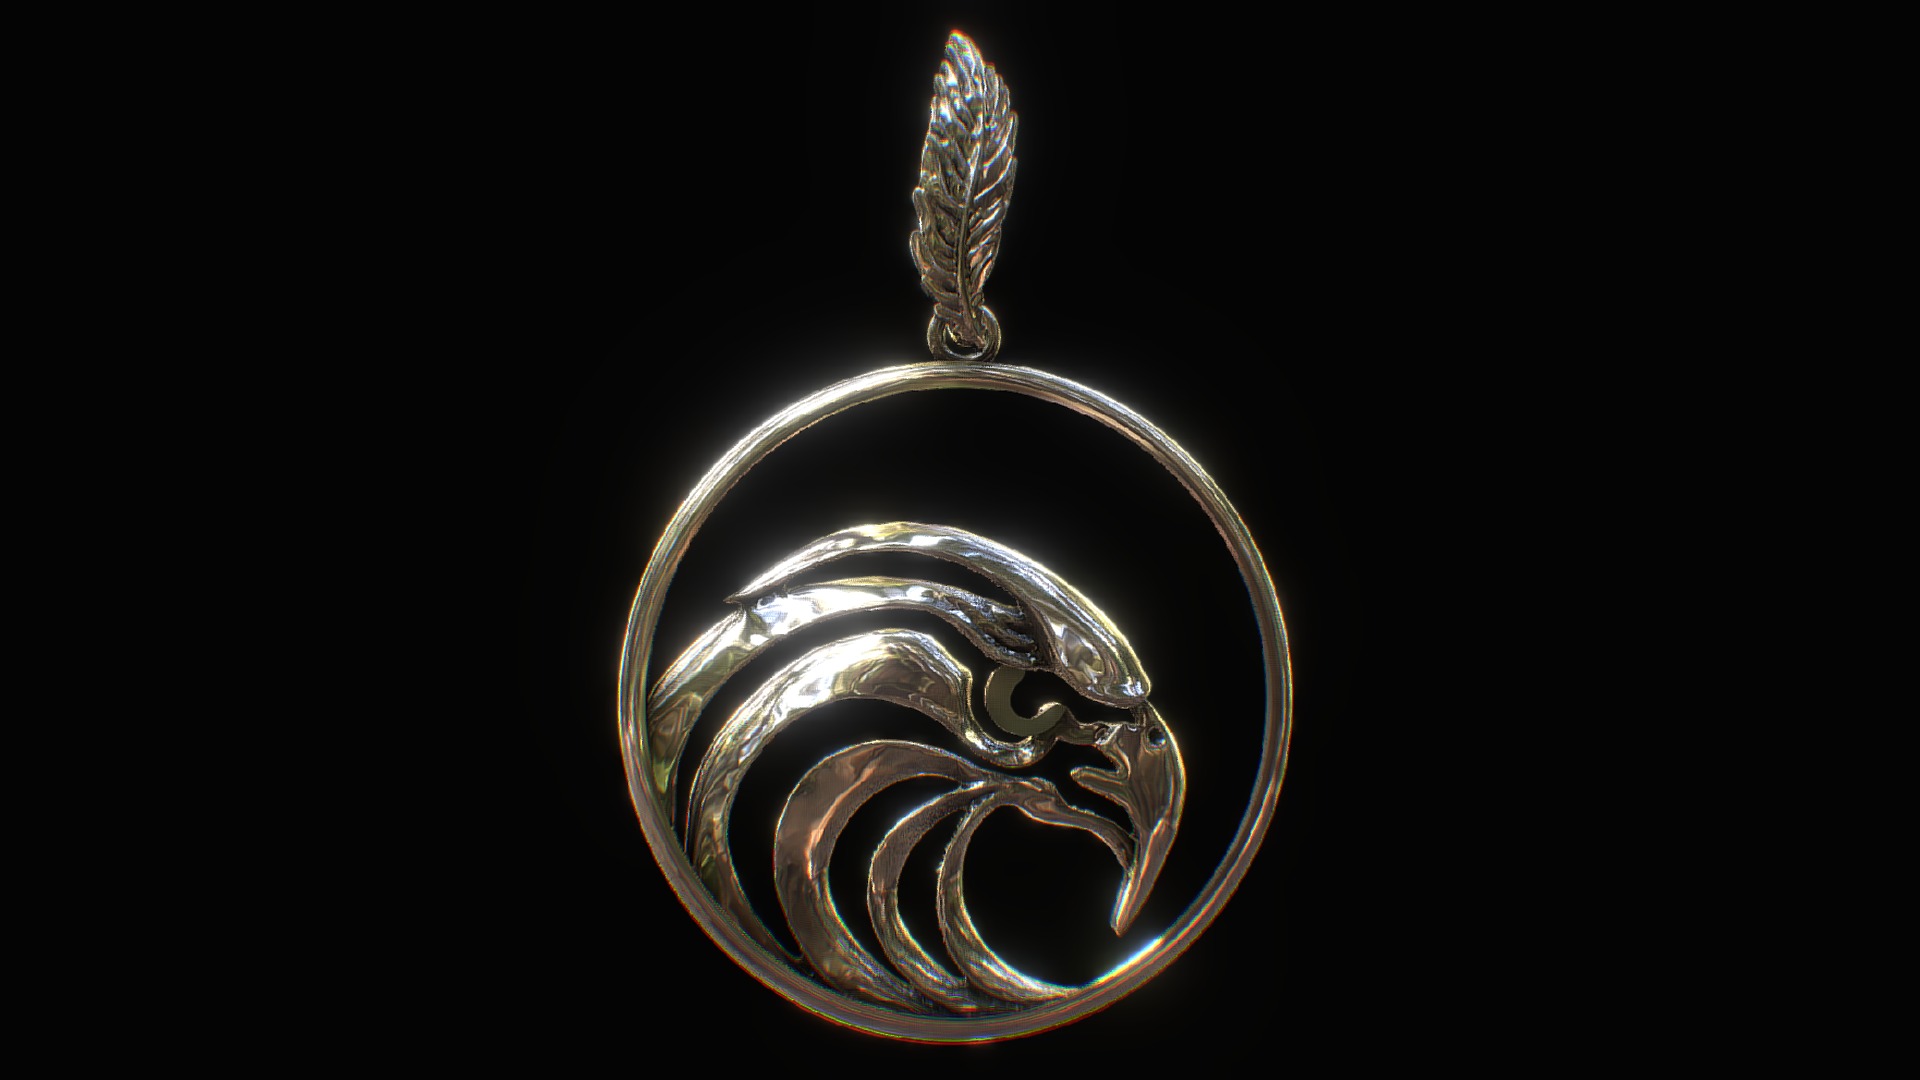 3D model Hawk’s eye - This is a 3D model of the Hawk's eye. The 3D model is about a silver and gold ring.